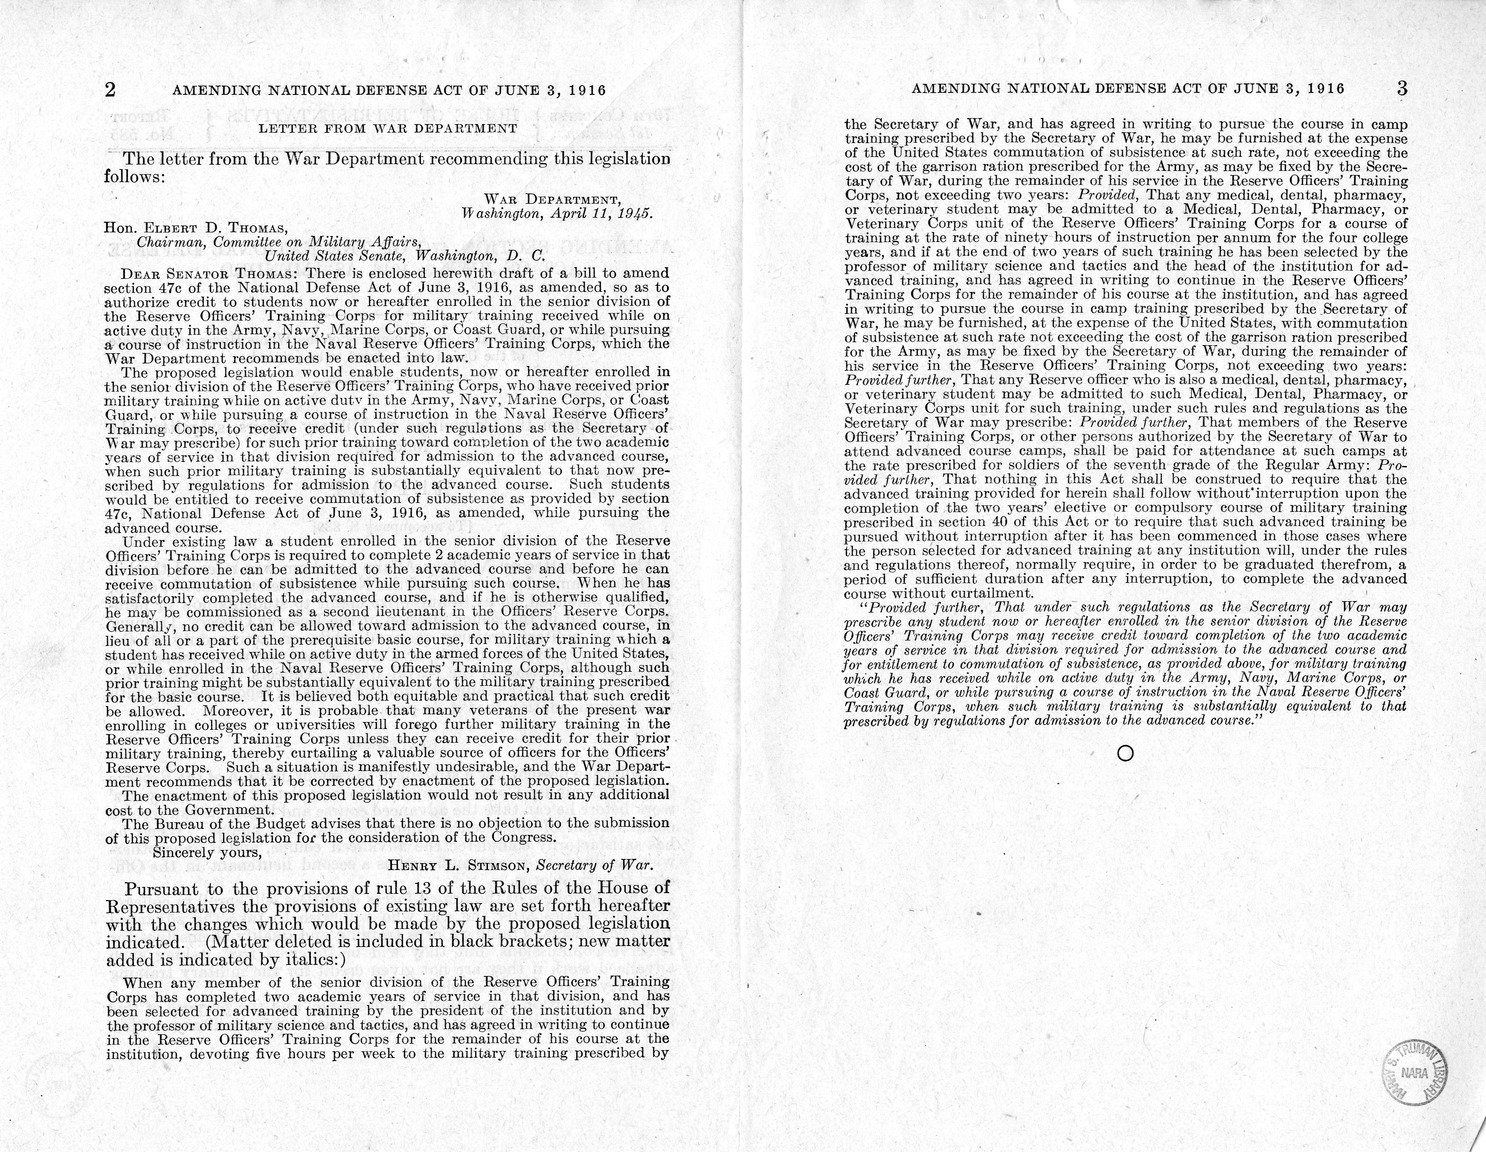 Memorandum from Harold D. Smith to M. C. Latta, S. 889, To Amend Section 47c of the National Defense Act of June 3, 1916, as Amended, with Attachments